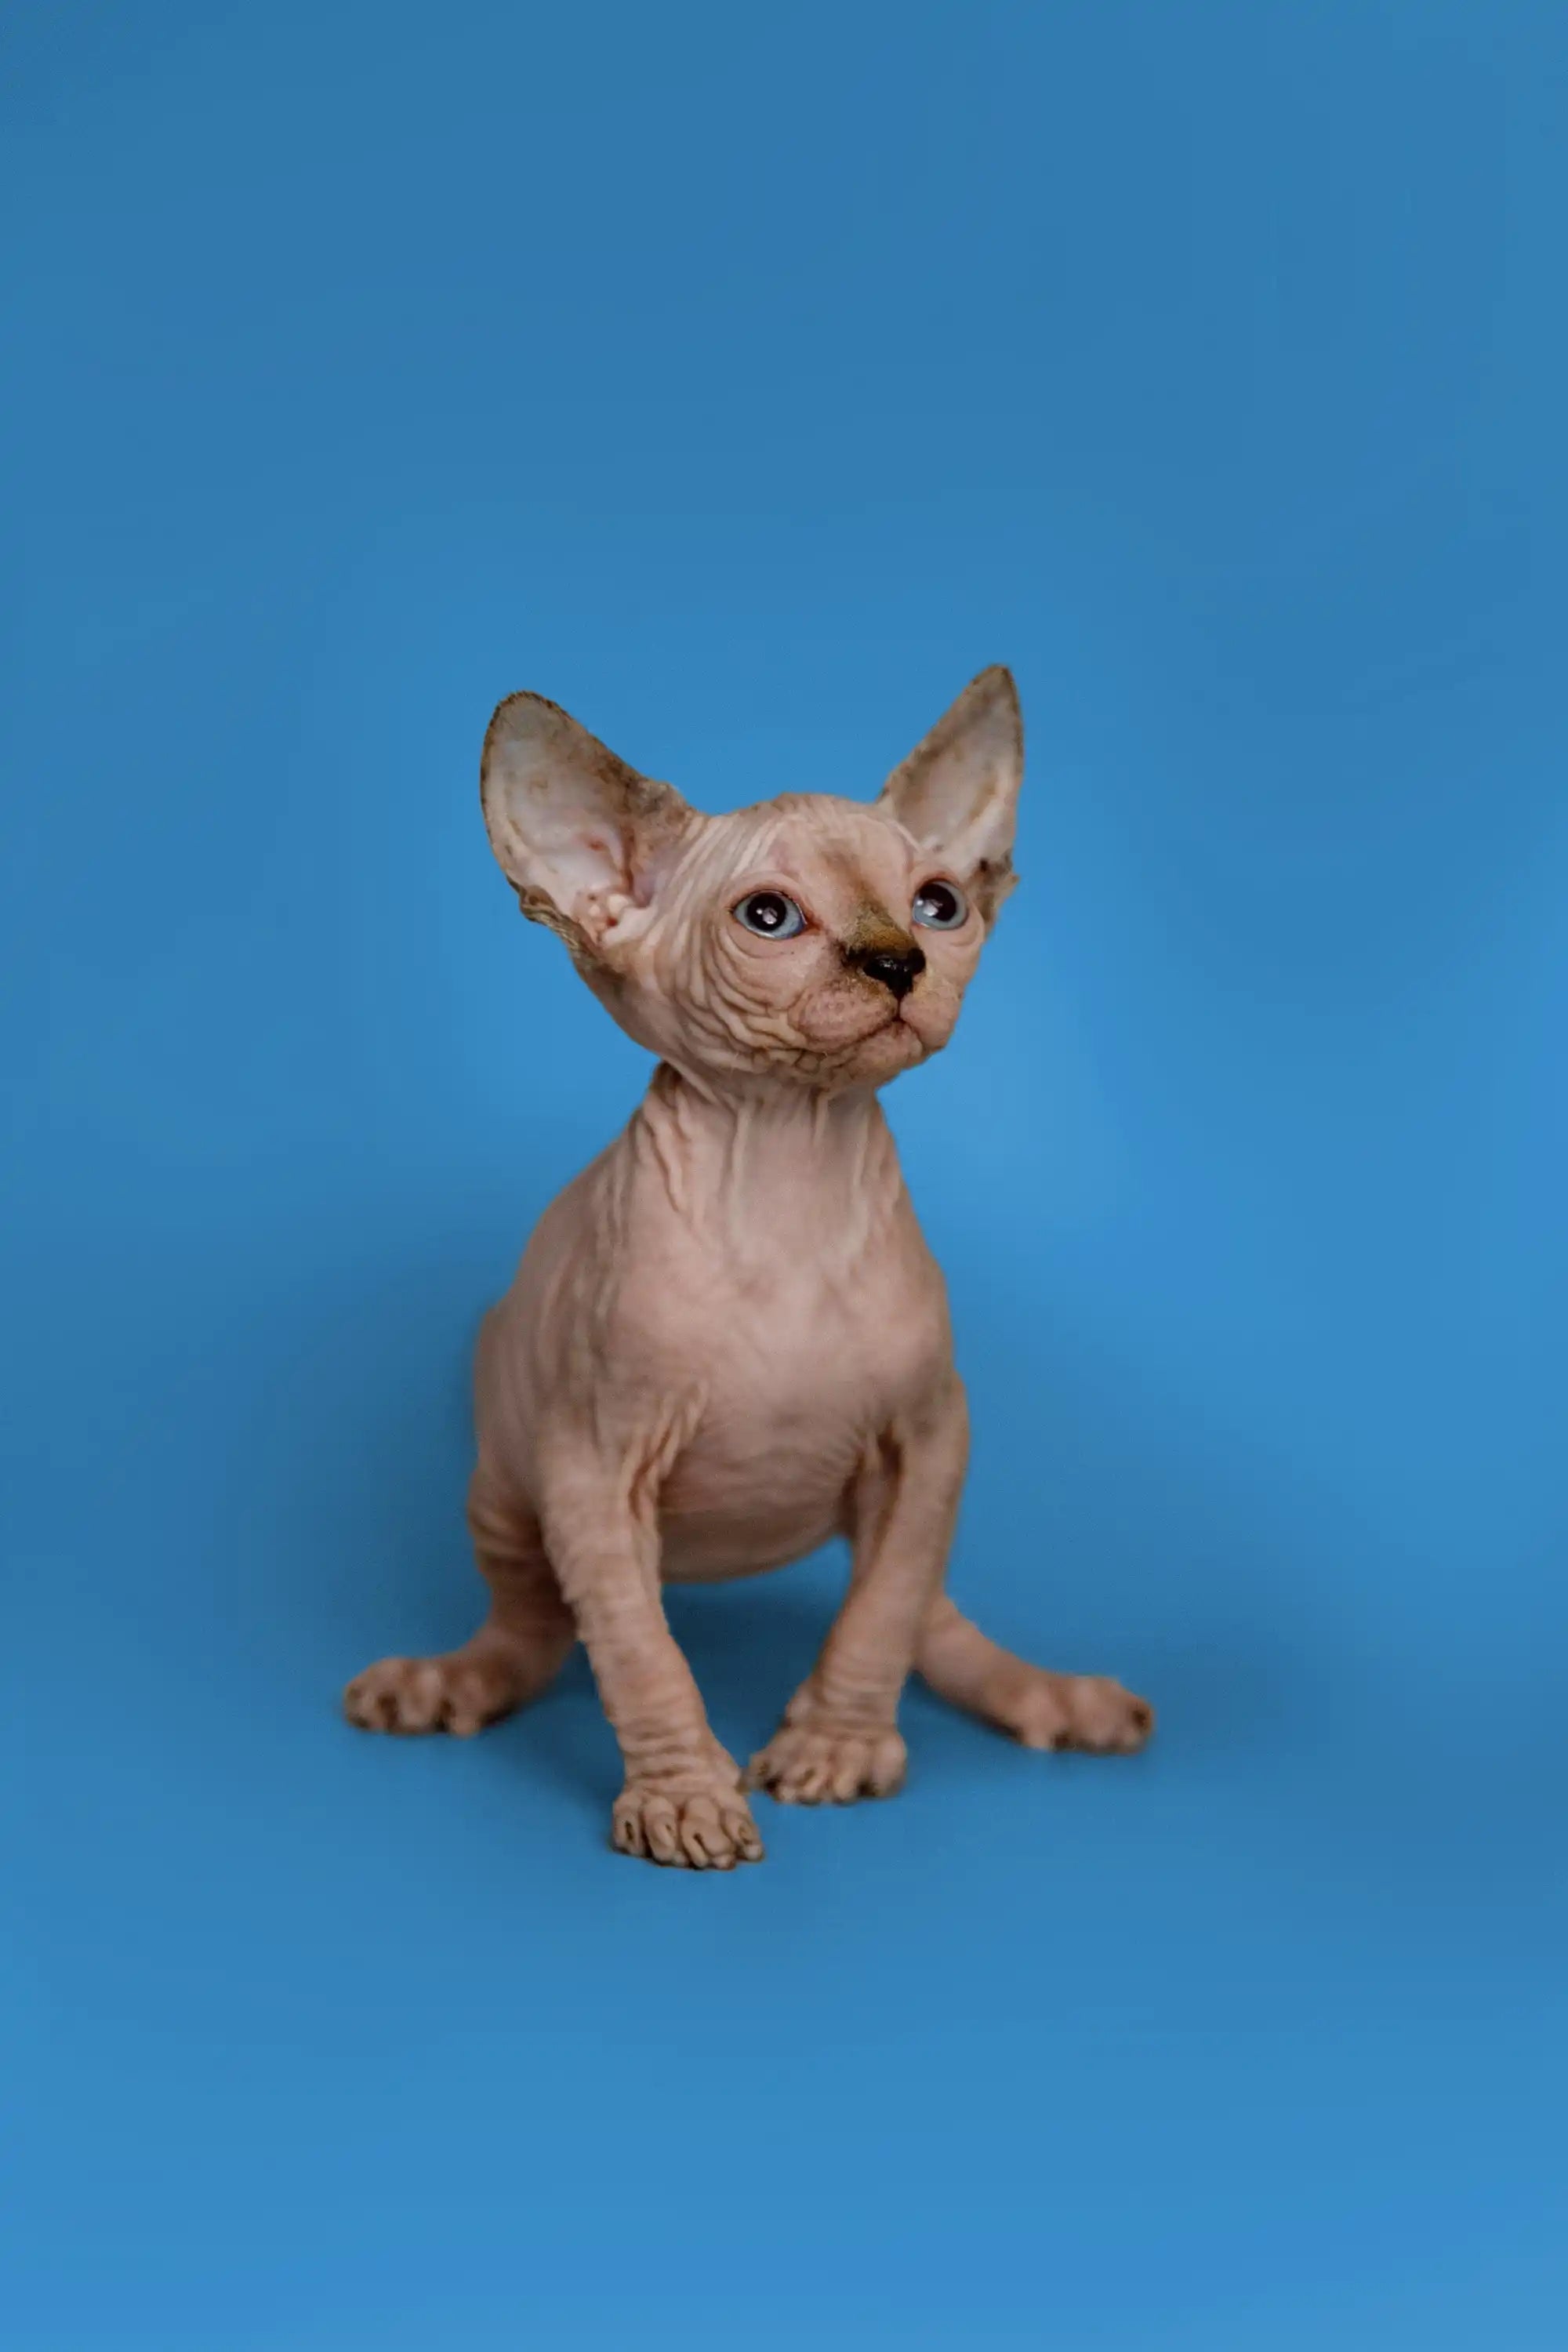 Sphynx Cats and Kittens for Sale Kendra | Kitten